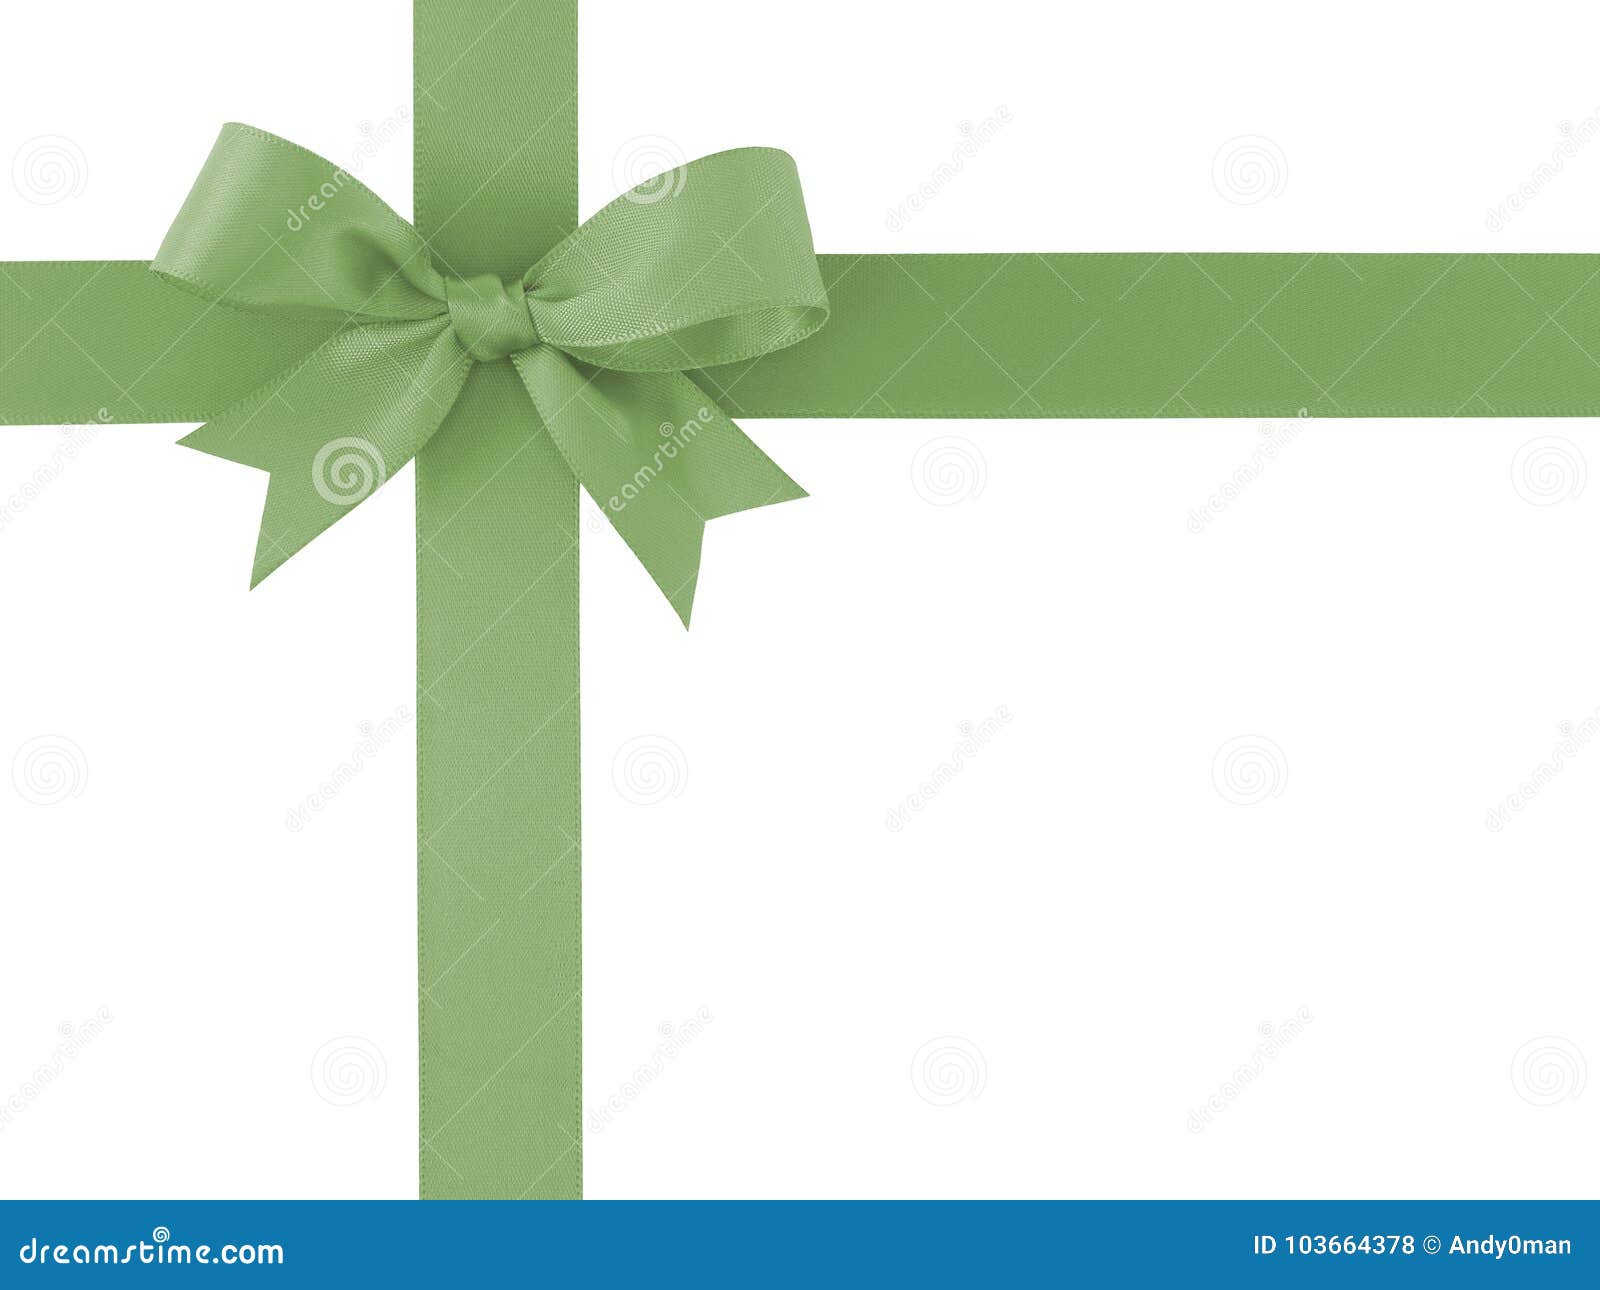 Download Green Ribbon With Bow Isolated White Background Stock Image of pattern